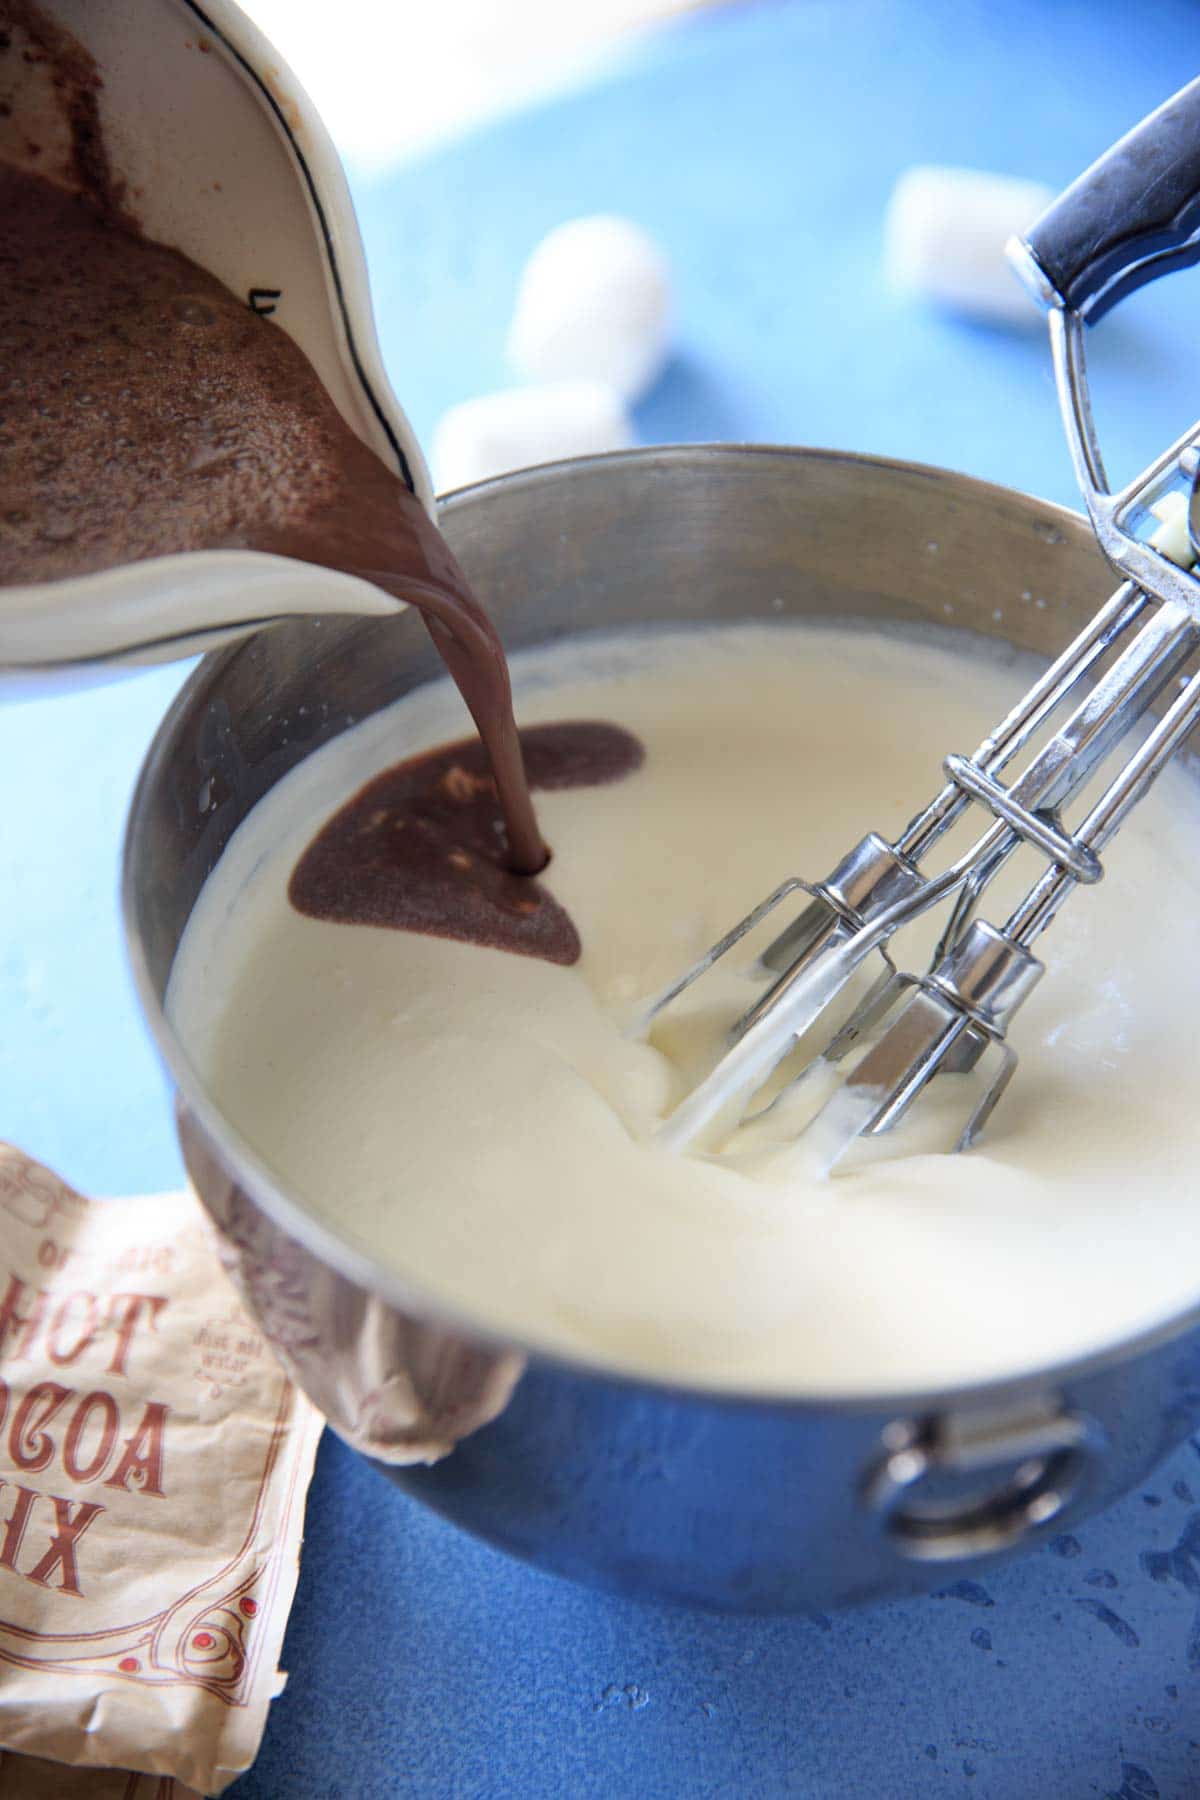 Pouring the hot chocolate and sweetened condensed milk into the whipped whipping cream